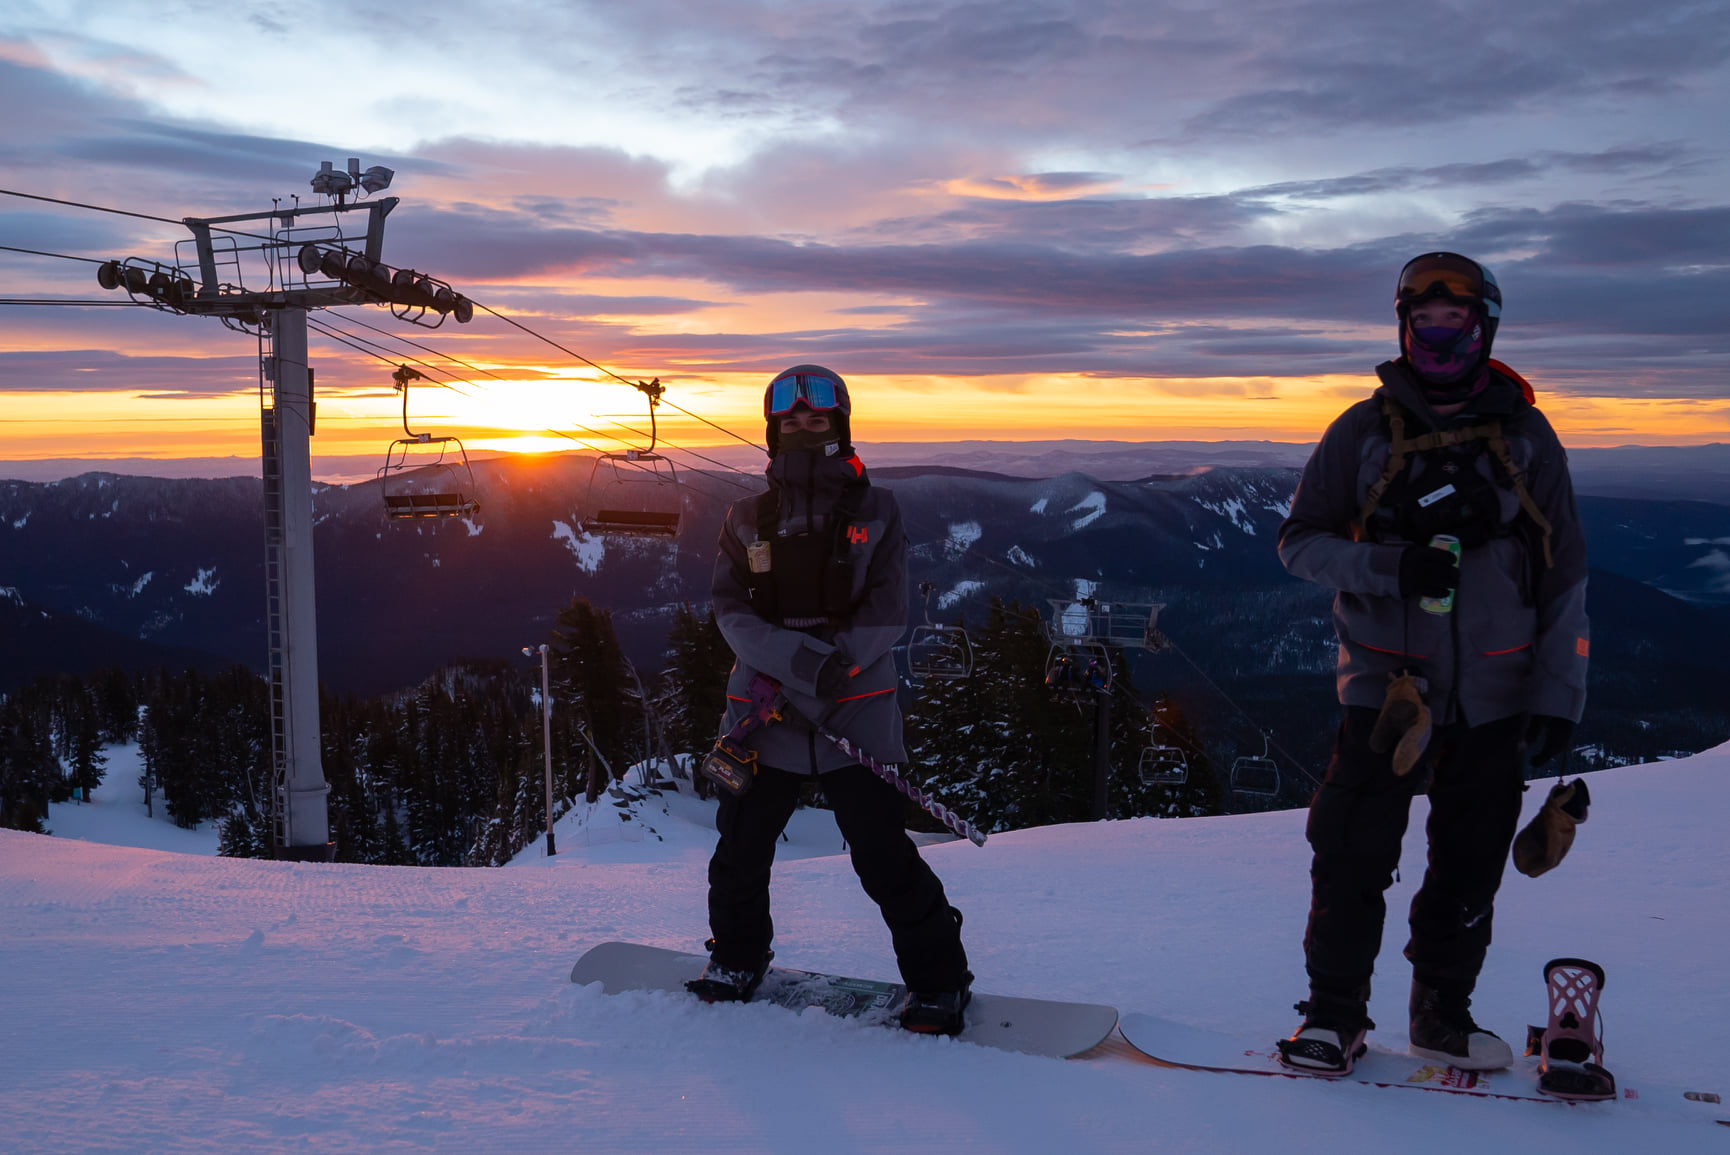 Two snowboarders pose in front of the chairlift with an orange sunset behind them at Mount Hood Meadows.